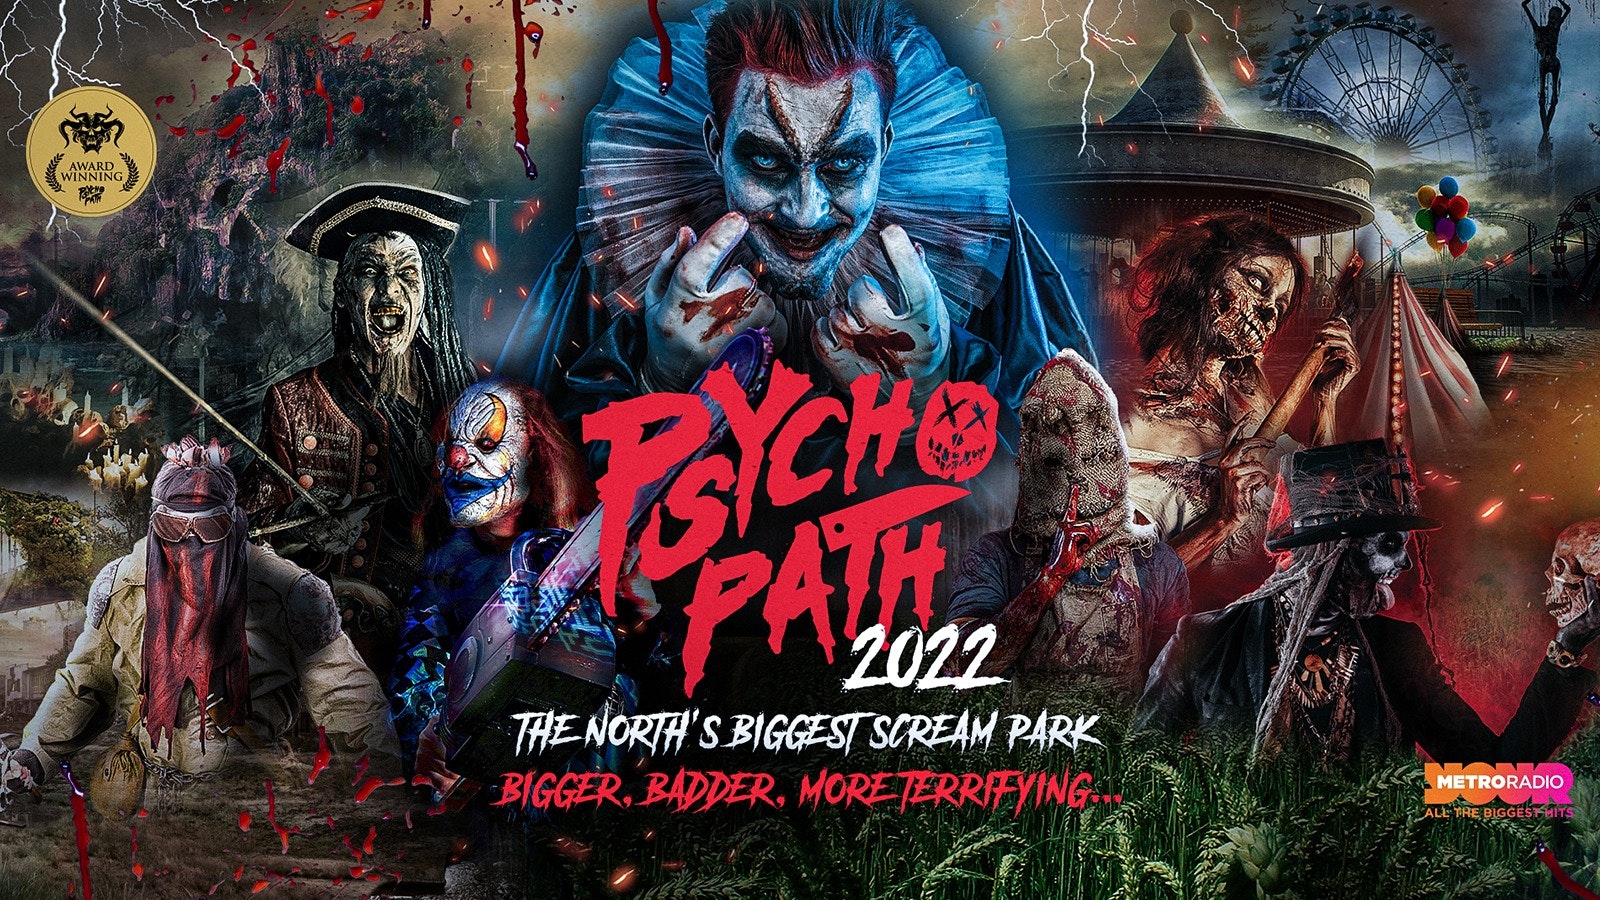 Psycho Path Presents FearGround – Oct 28th